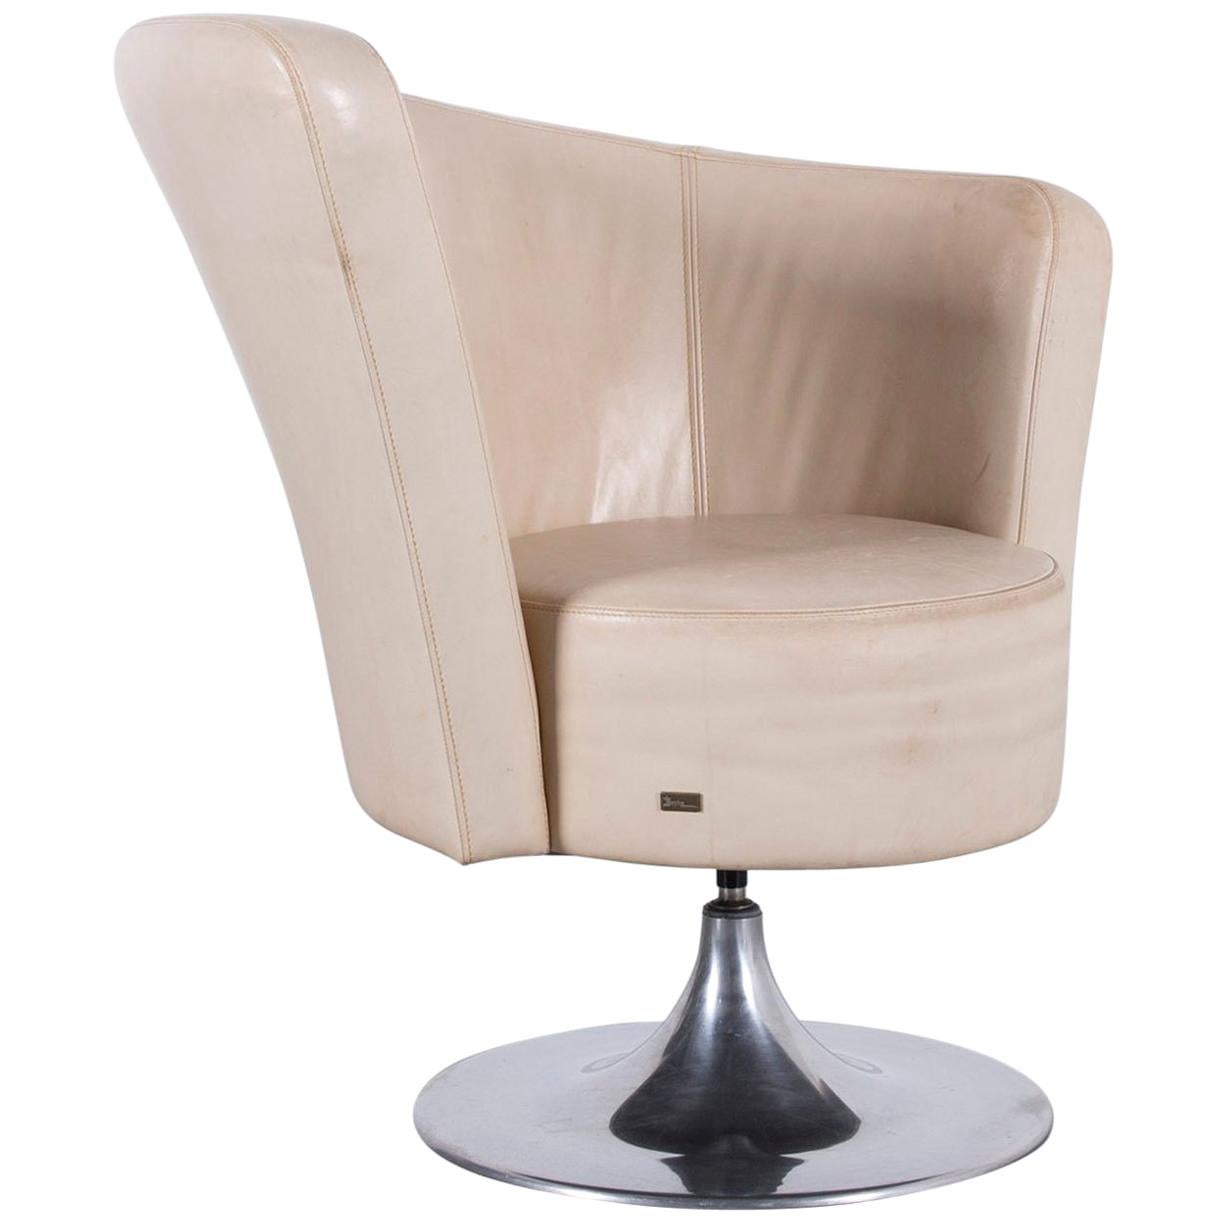 Bretz Eves Island Leather Armchair Off-White One-Seat For Sale